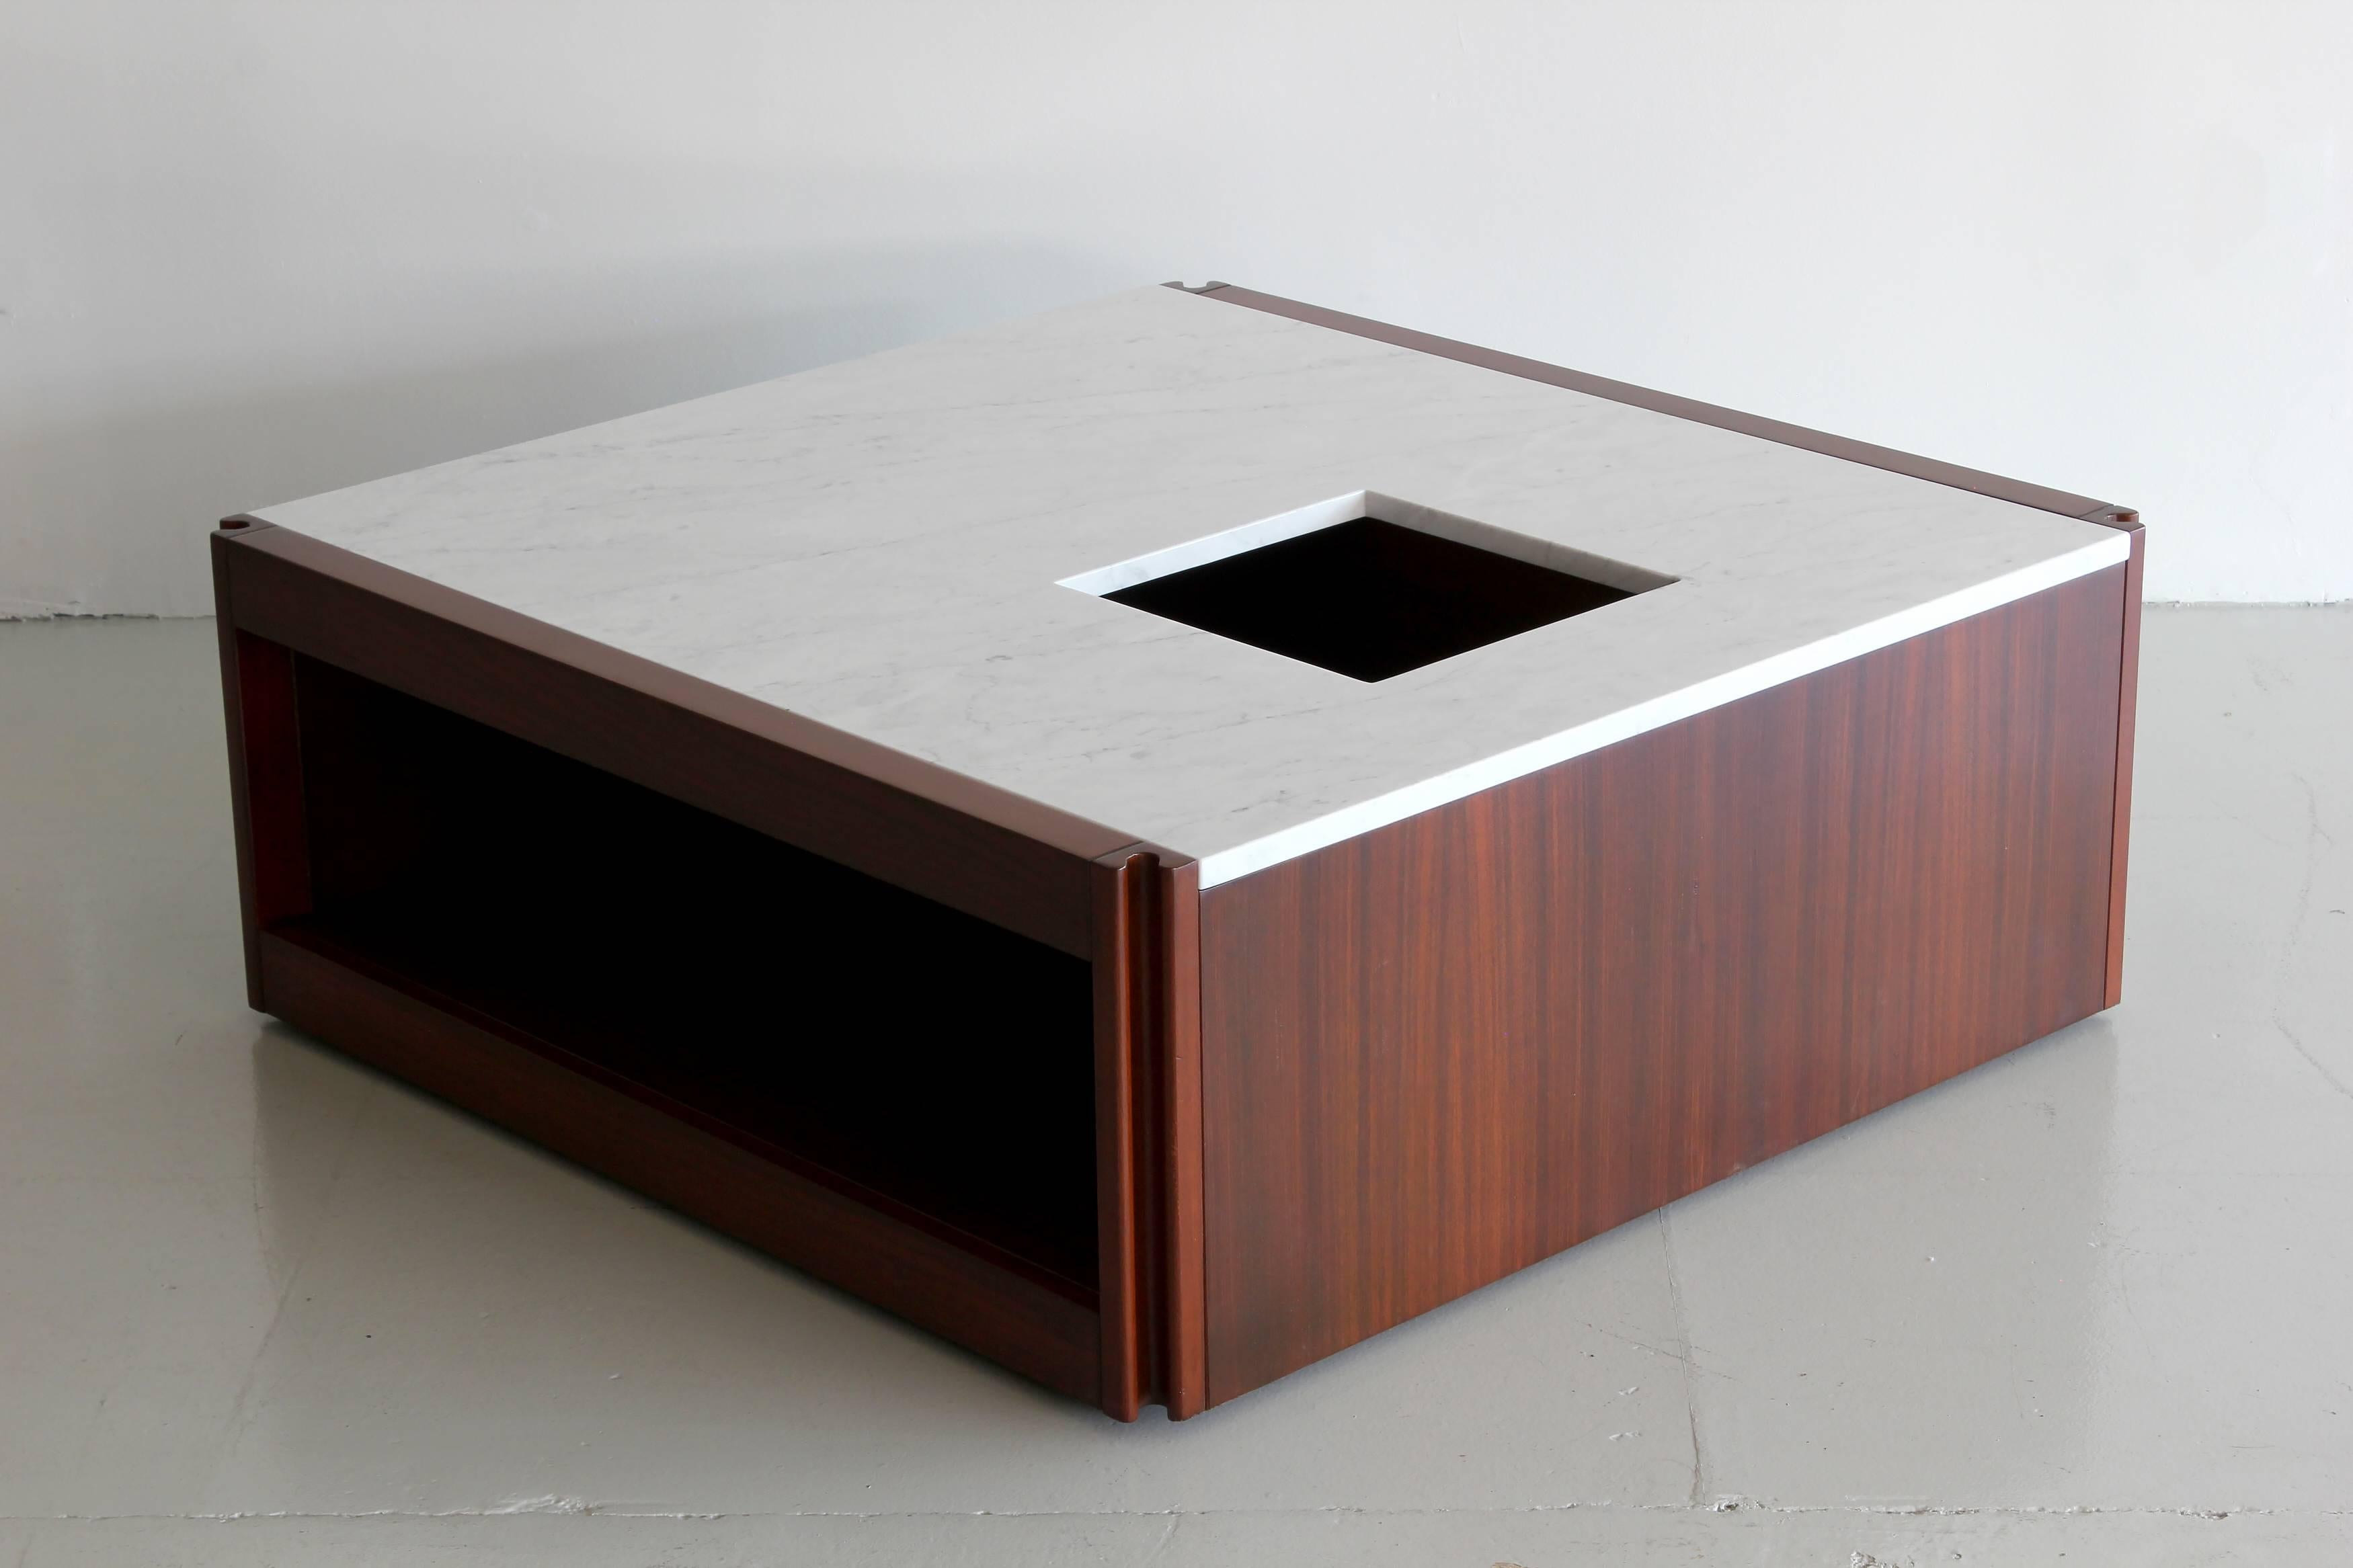 Rare marble and rosewood coffee table by Angelo Mangiarotti for Molteni. Beautiful squared shape with rosewood base and marble top with two cubby hole openings and a central plant holder. The piece has all edges designed with an ergonomic shape and